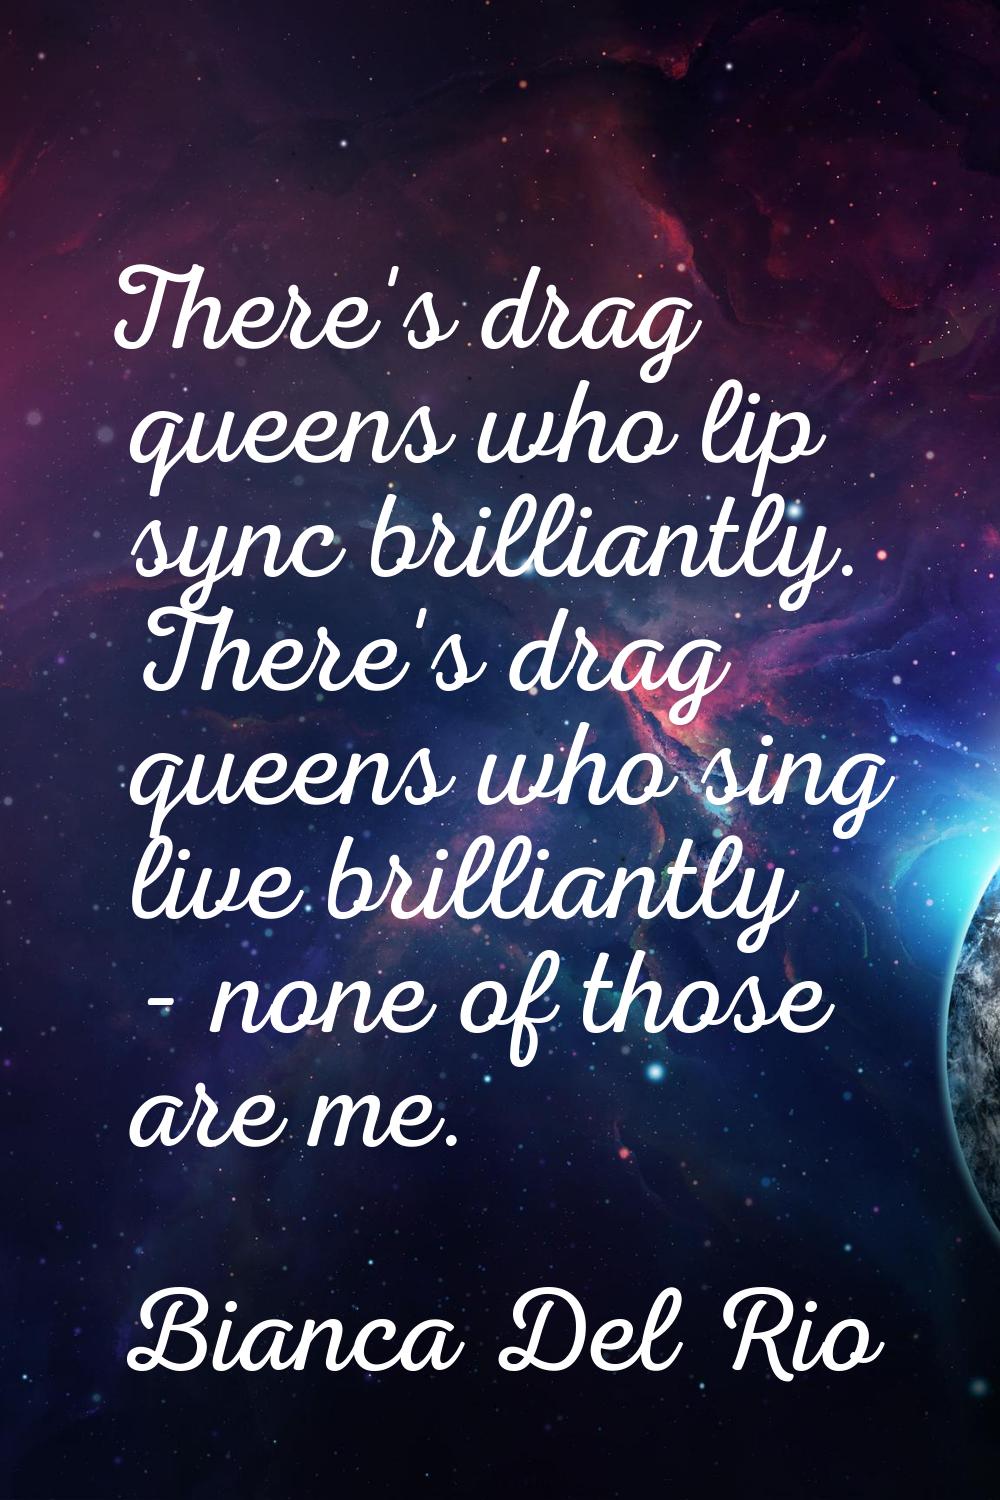 There's drag queens who lip sync brilliantly. There's drag queens who sing live brilliantly - none 